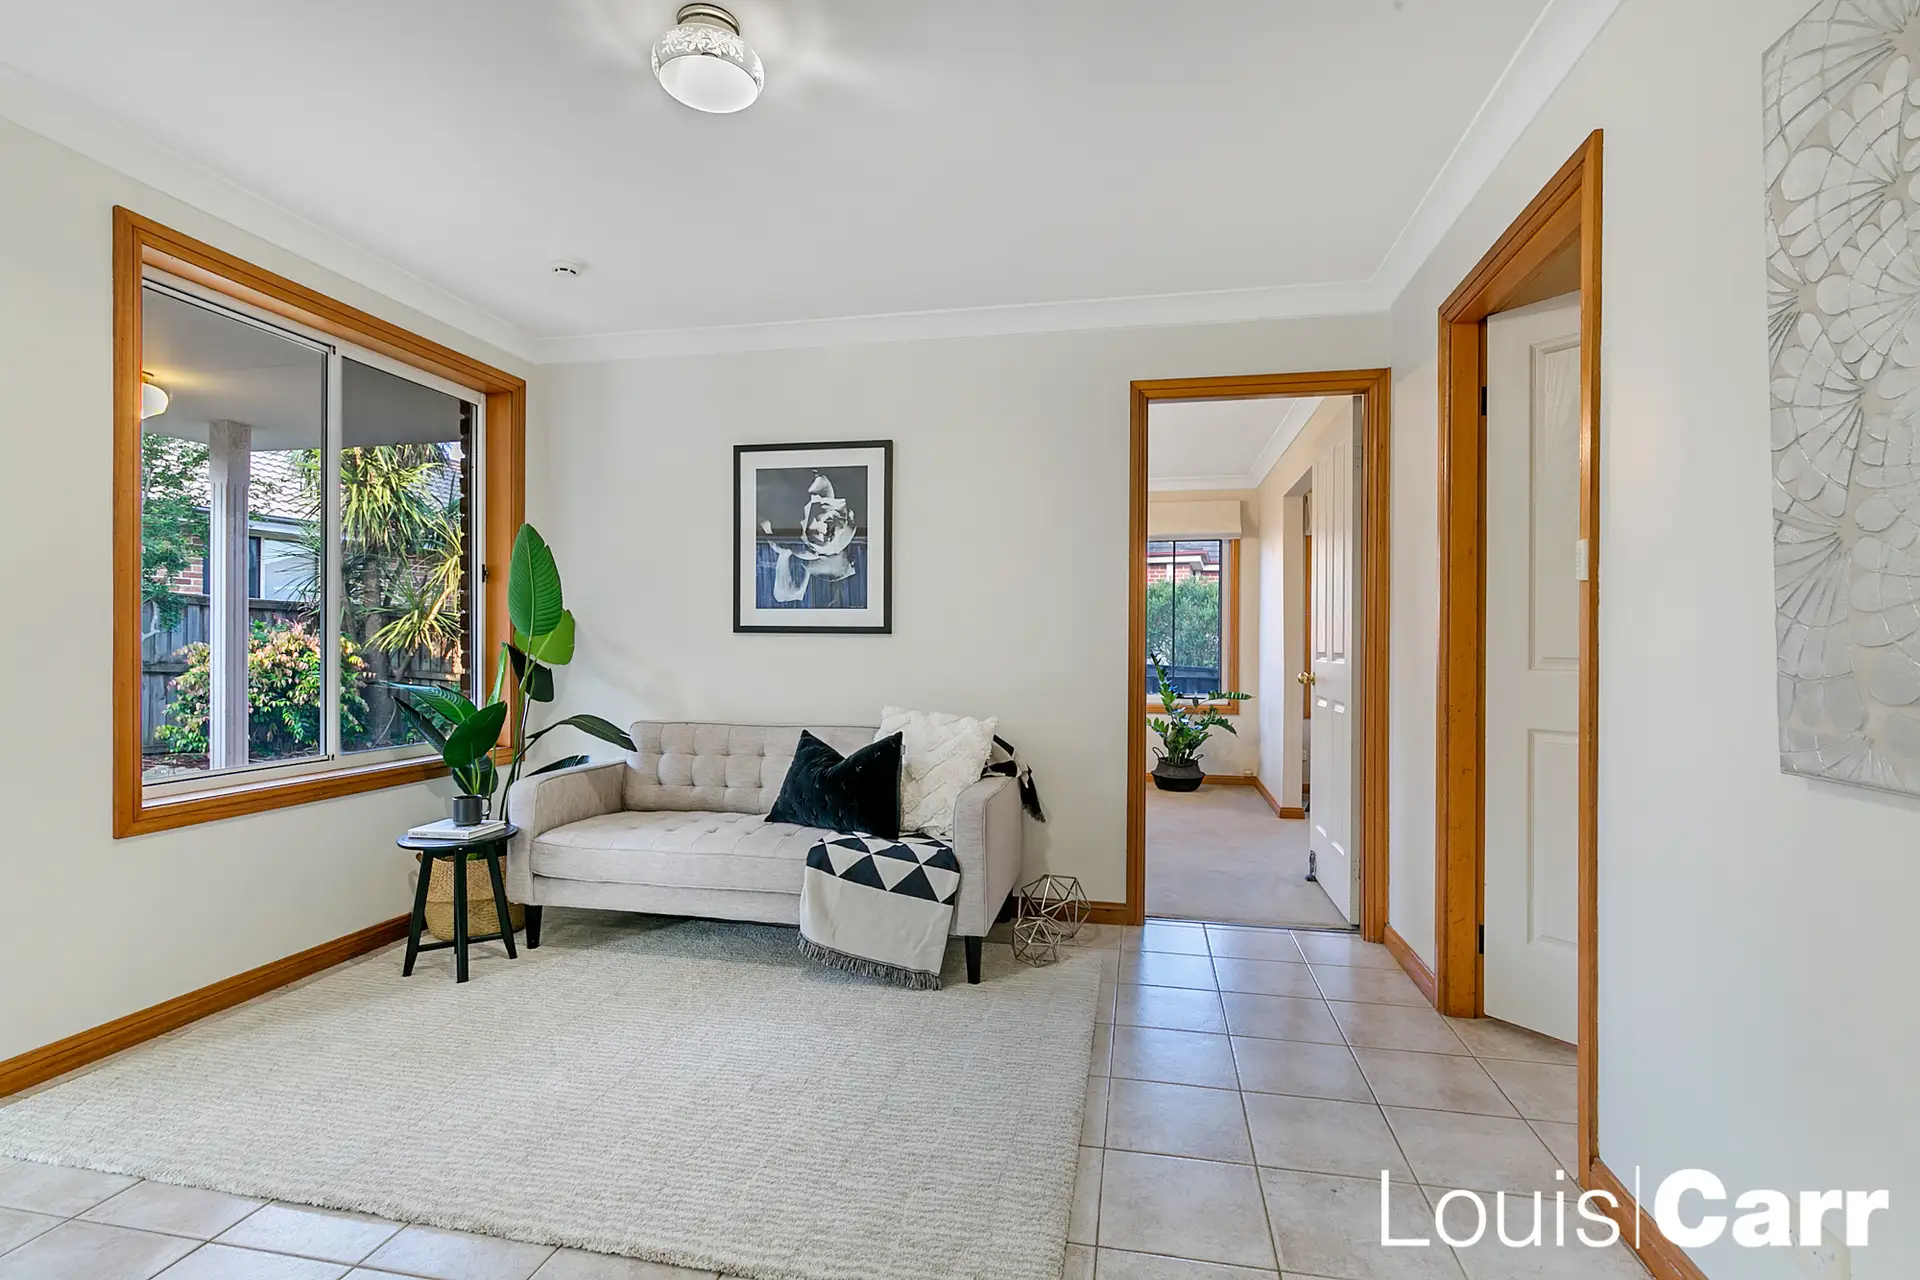 Photo #6: 3 Belinda Court, Castle Hill - Sold by Louis Carr Real Estate